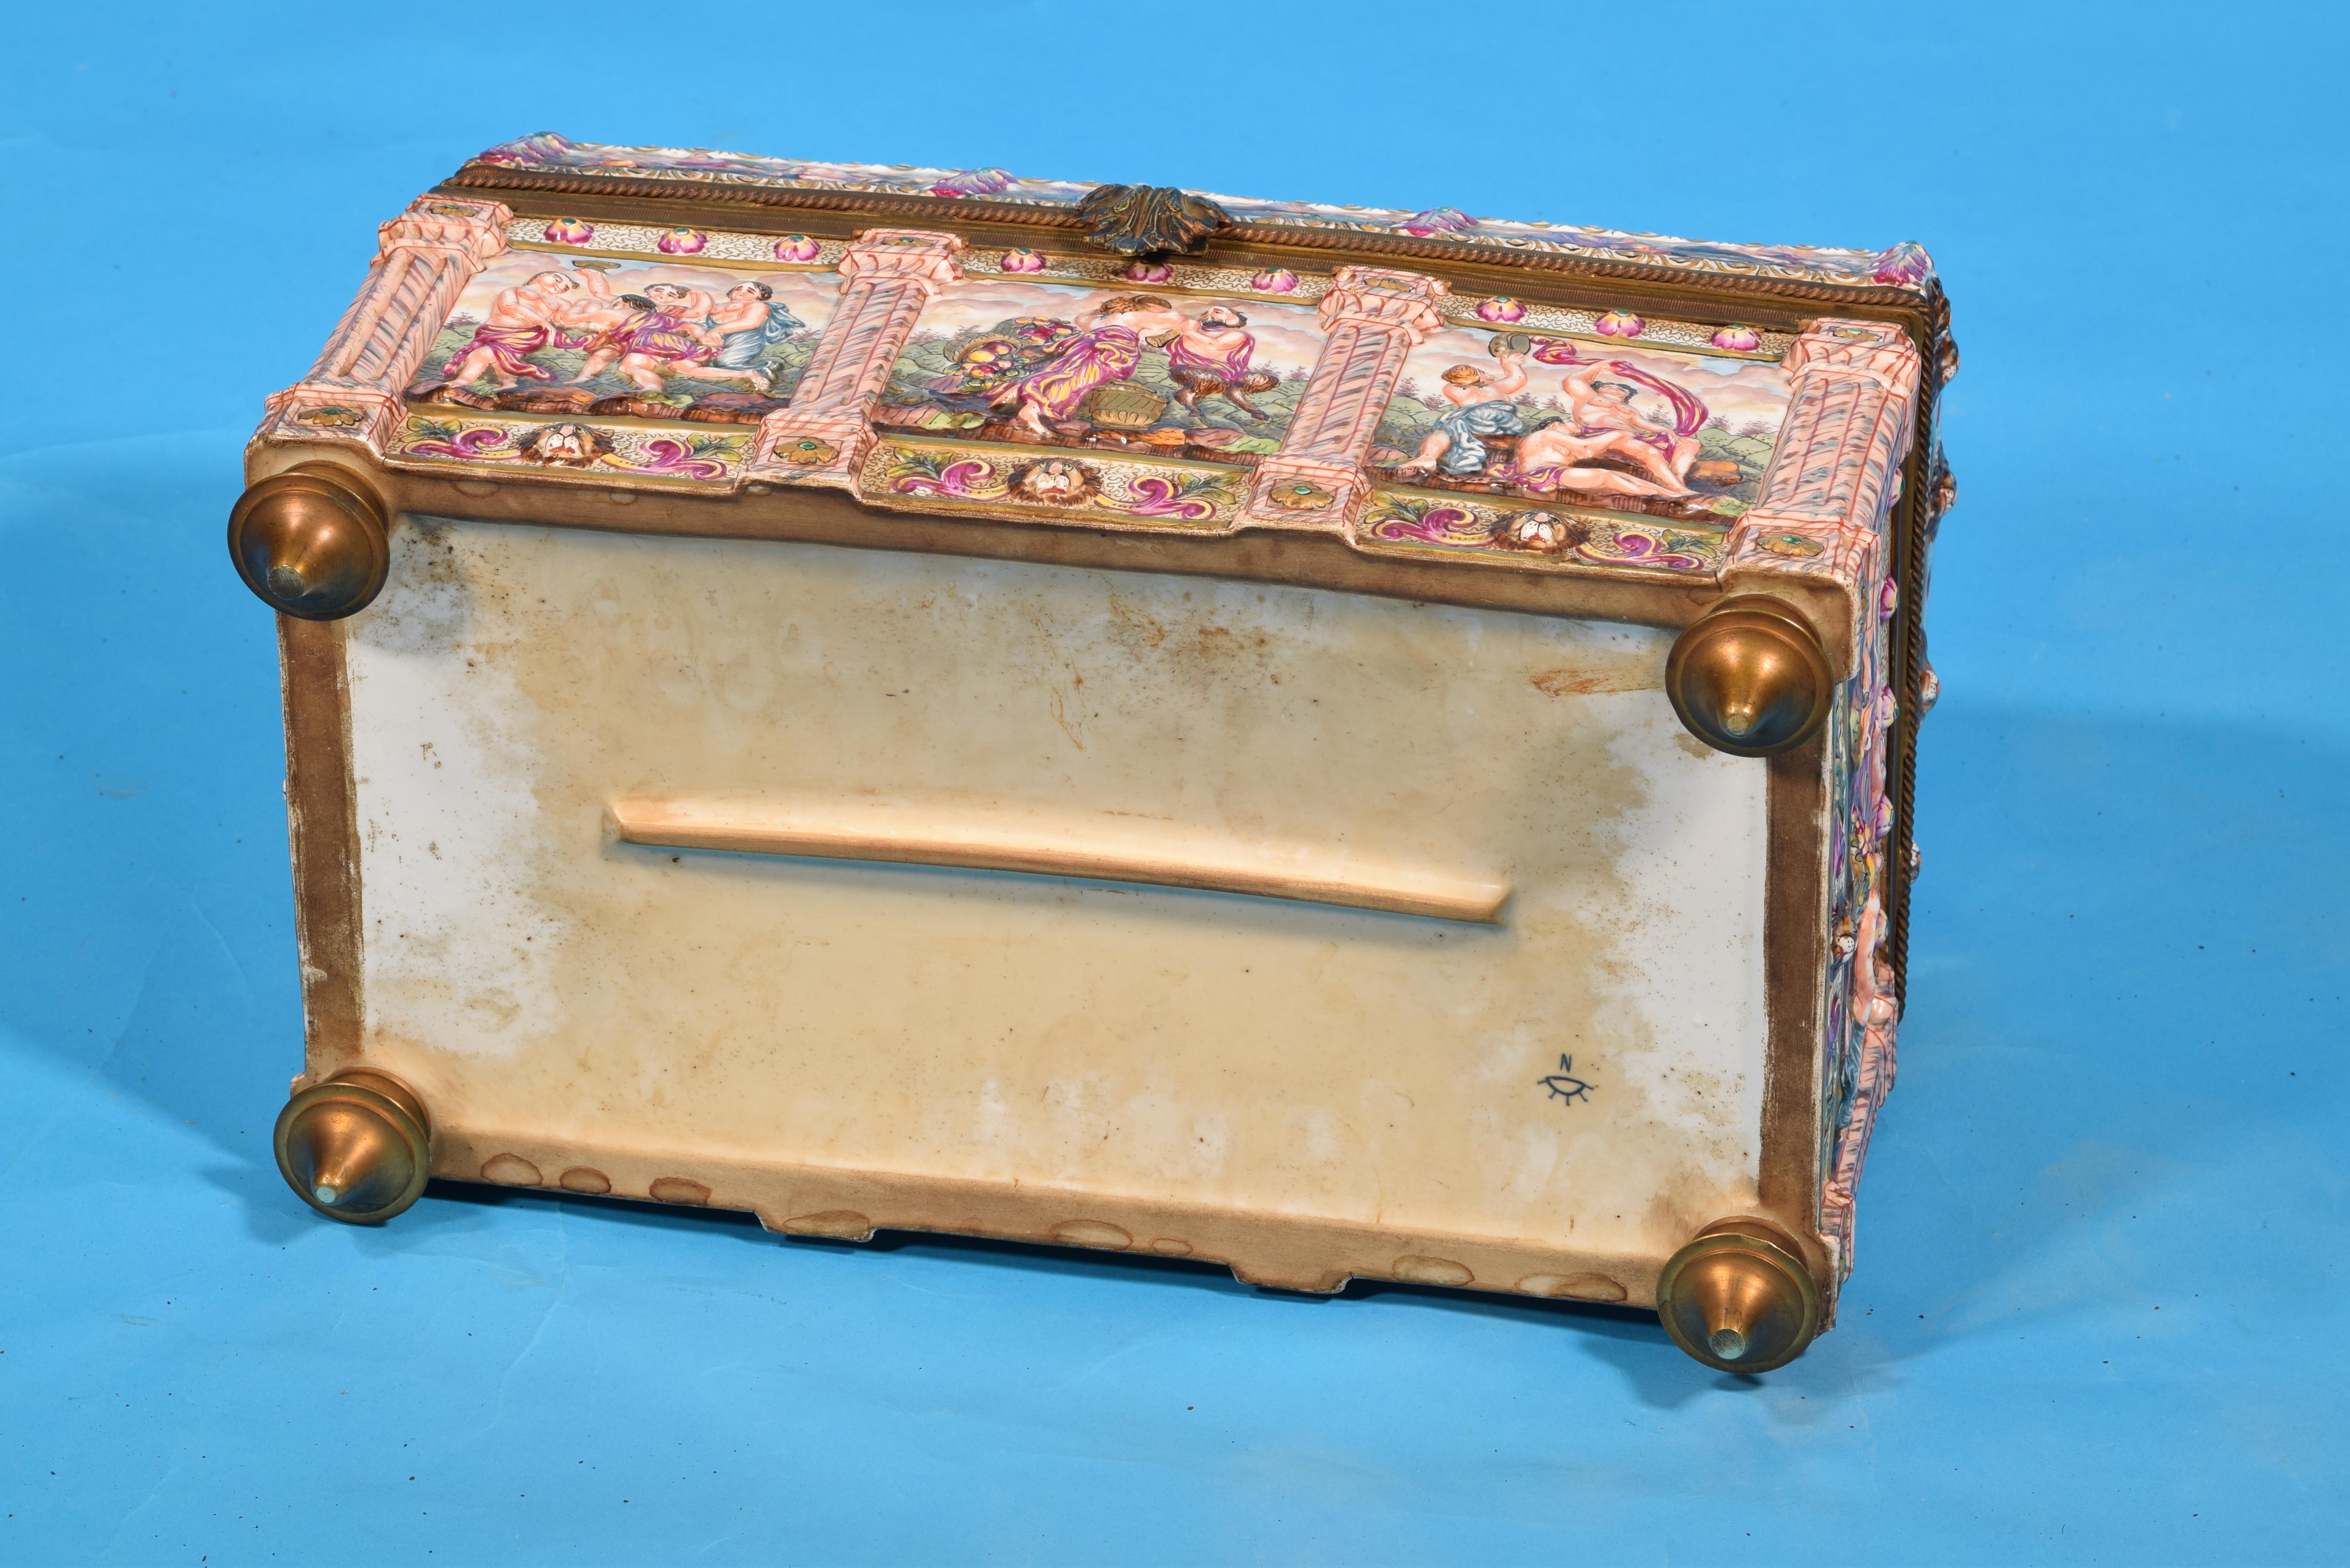 Neoclassical Capodimonte Porcelain Chest or Jewelry Box, Italy, 19th Century, with Marks